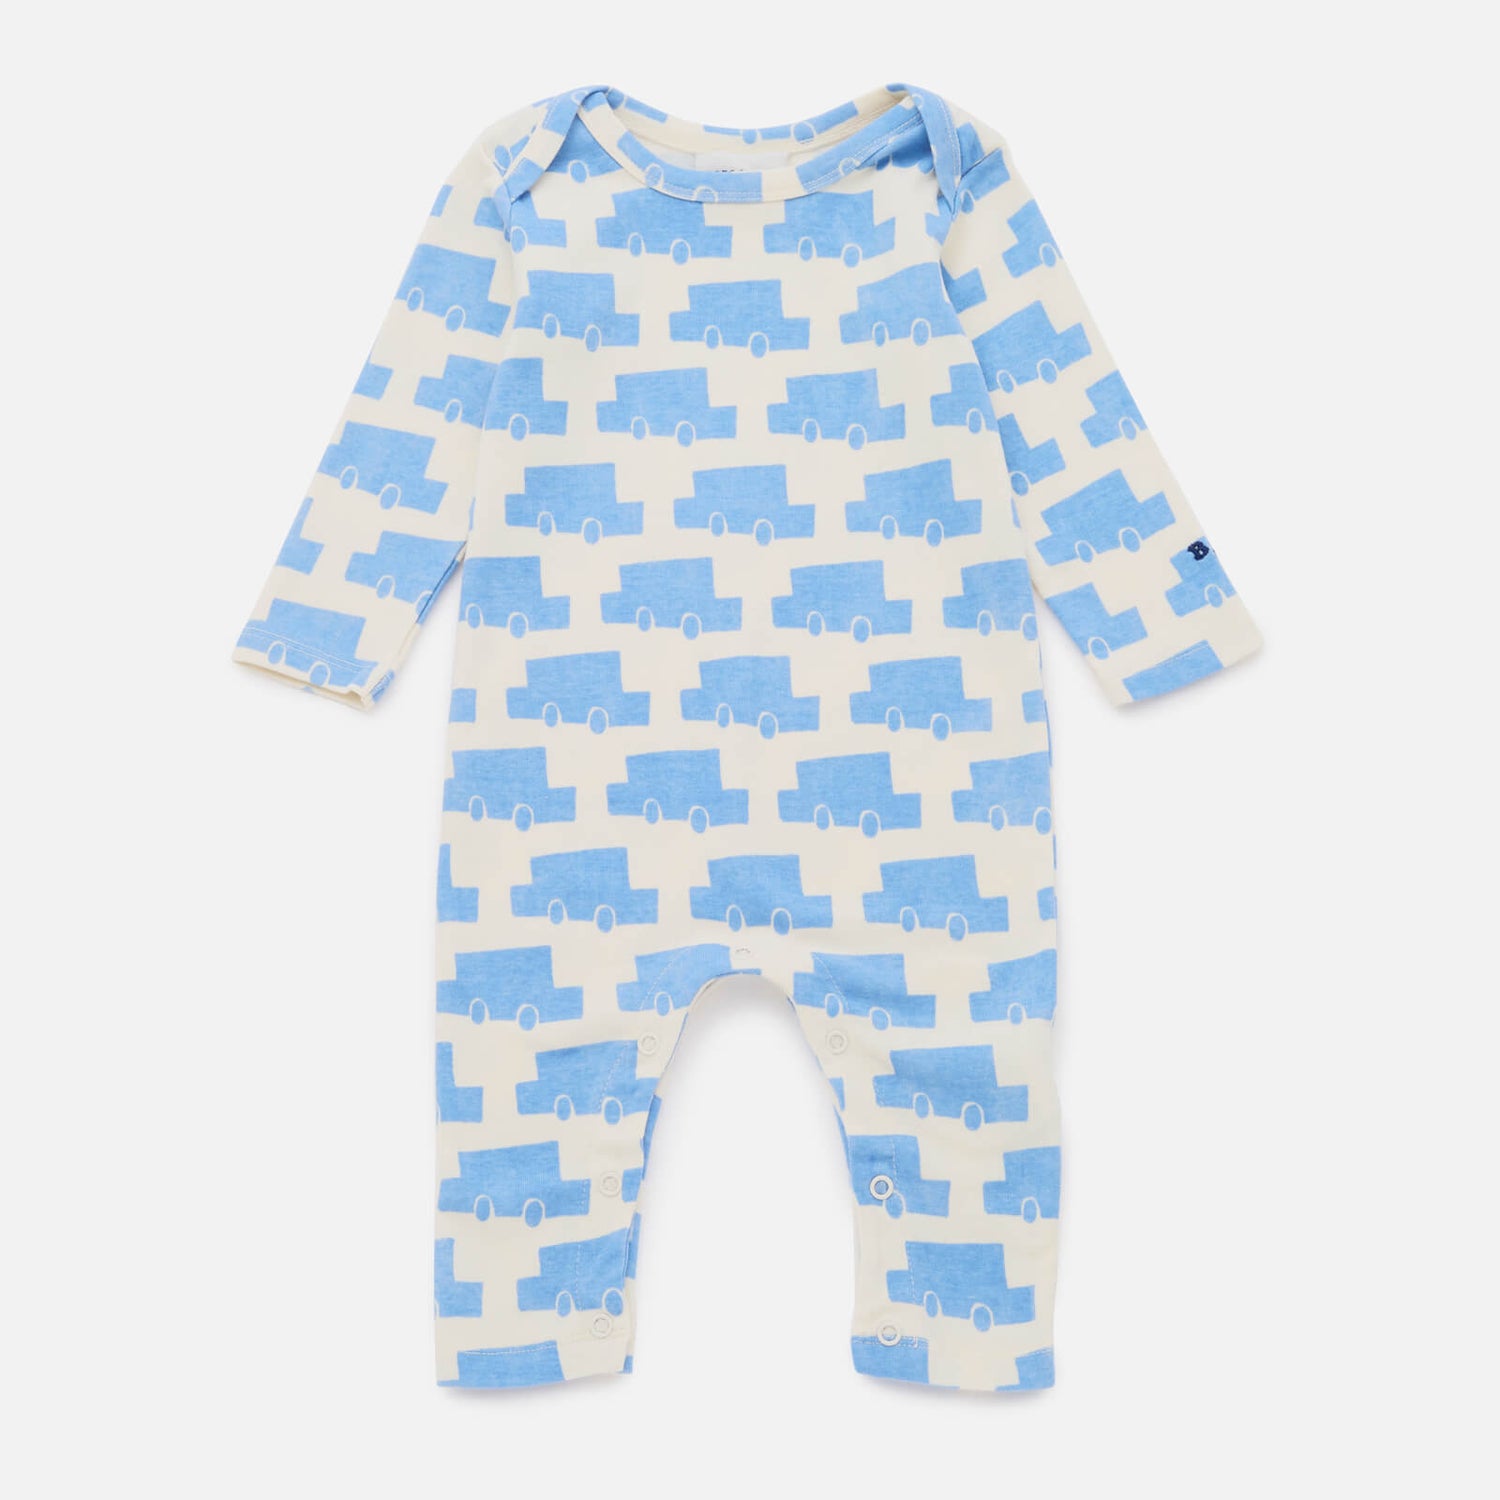 BoBo Choses Baby's Printed Cotton-Blend Jersey Babygrow - 6-12 months